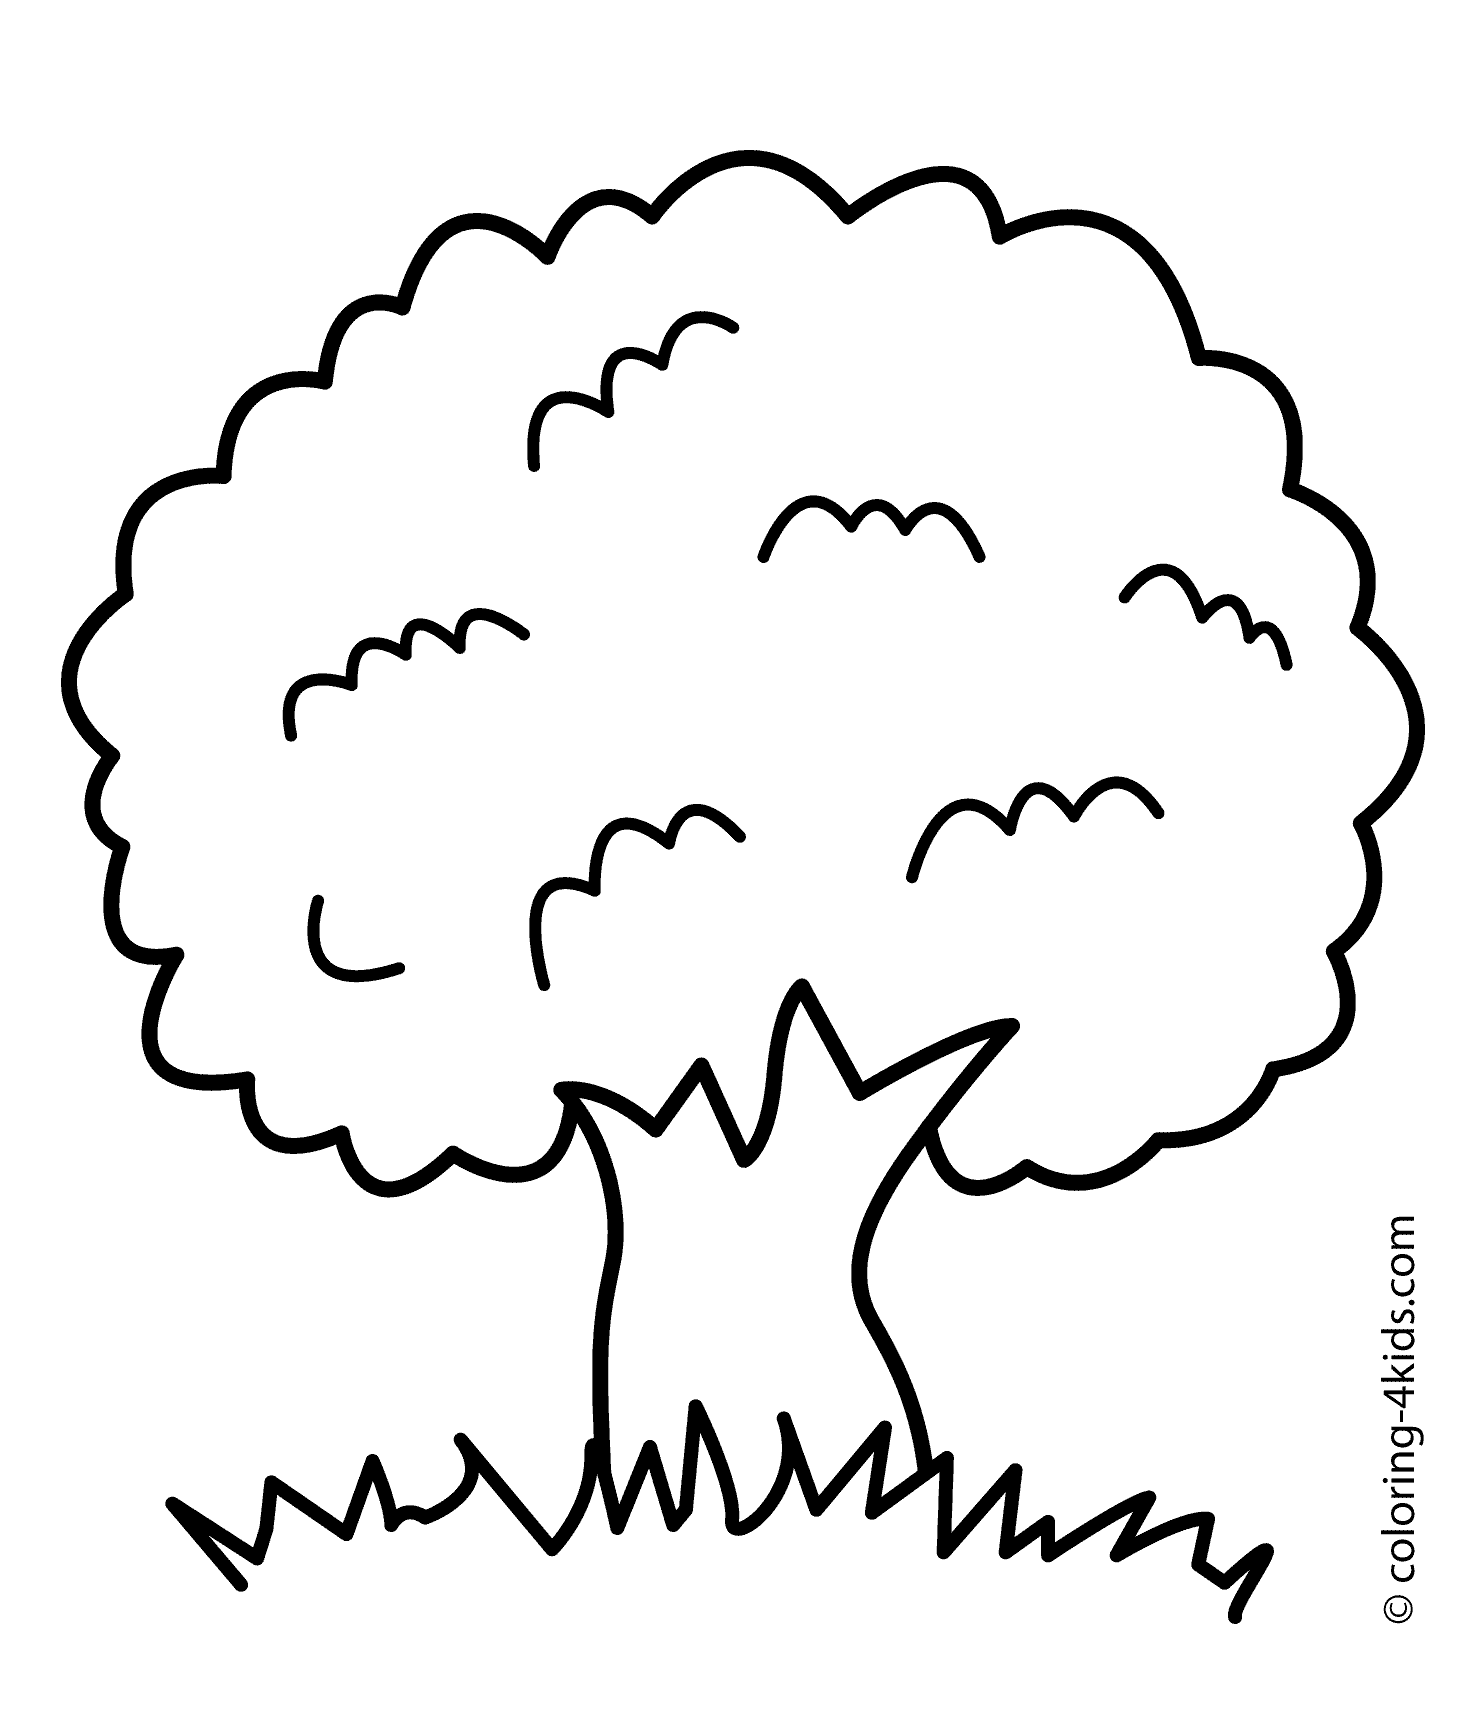 free-tree-birthday-coloring-page-download-free-tree-birthday-coloring